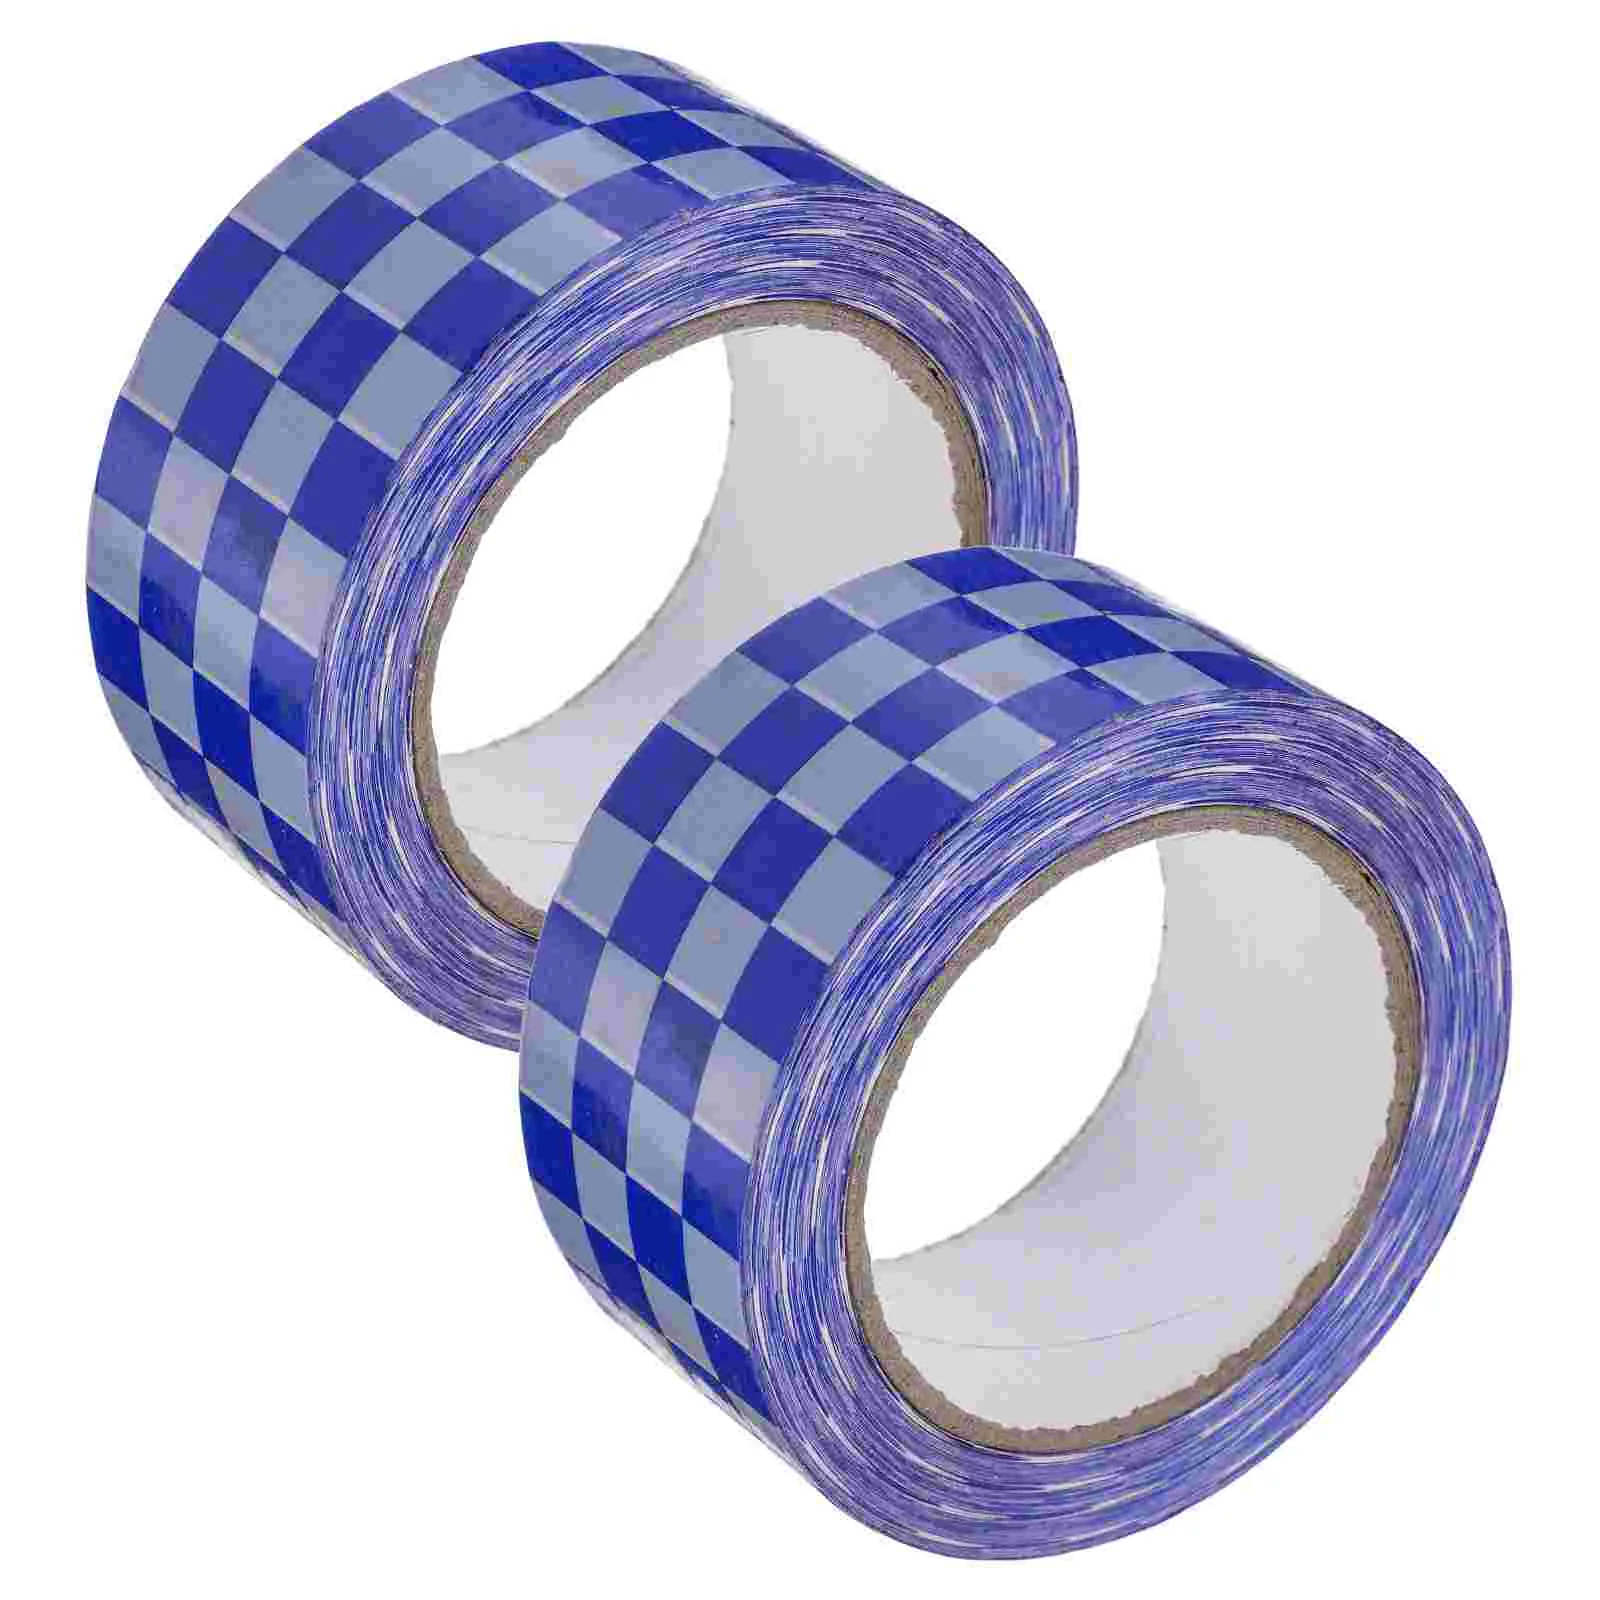 

2 Rolls Plaid Sealing Tape Packaging Checkerboard Patterned Duct Bopp Packing for Package